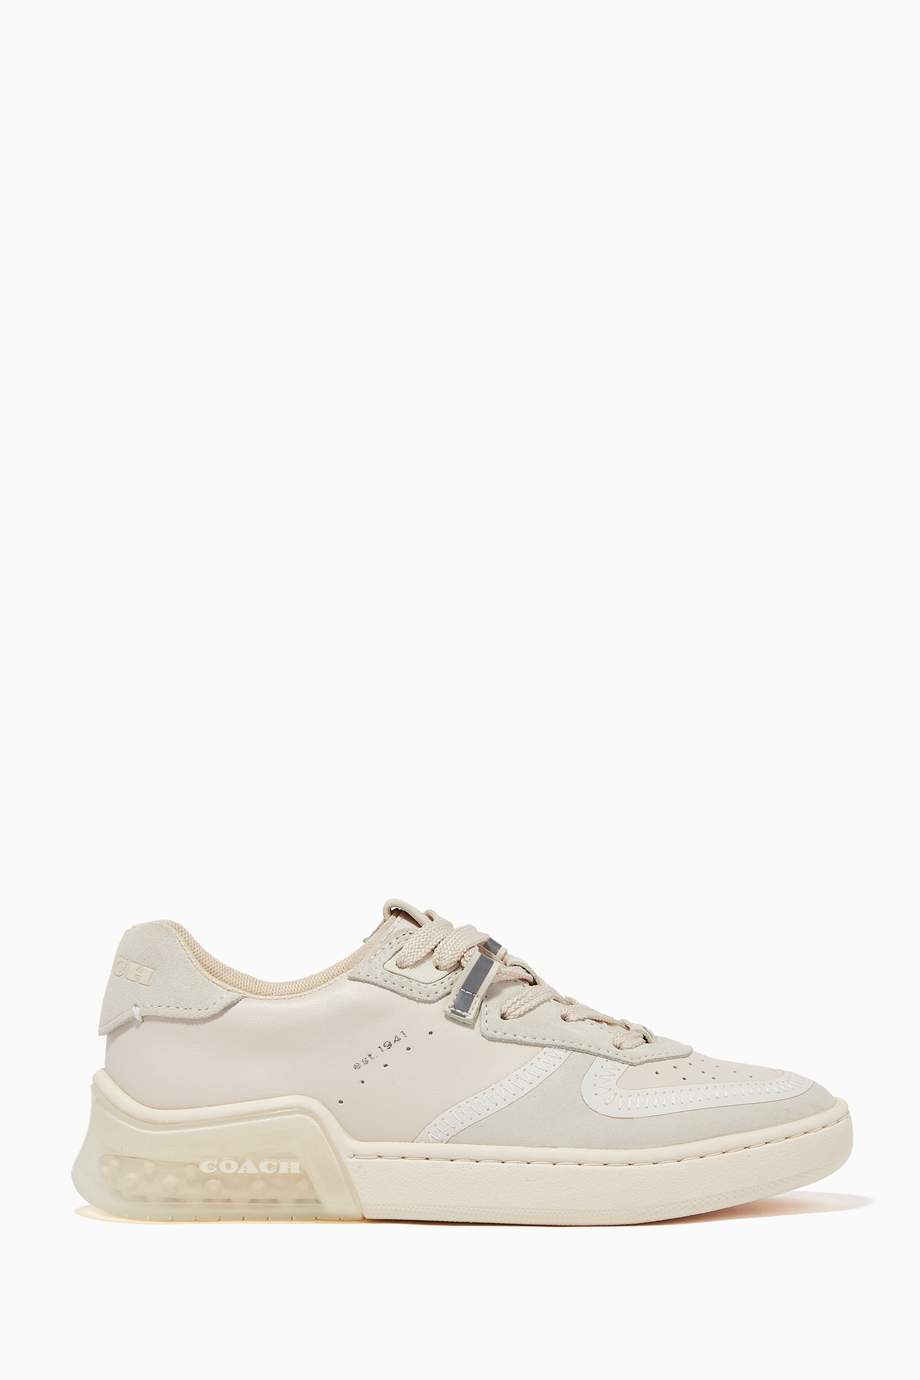 Shop Coach White Citysole Court Sneakers in Leather for Women | Ounass UAE